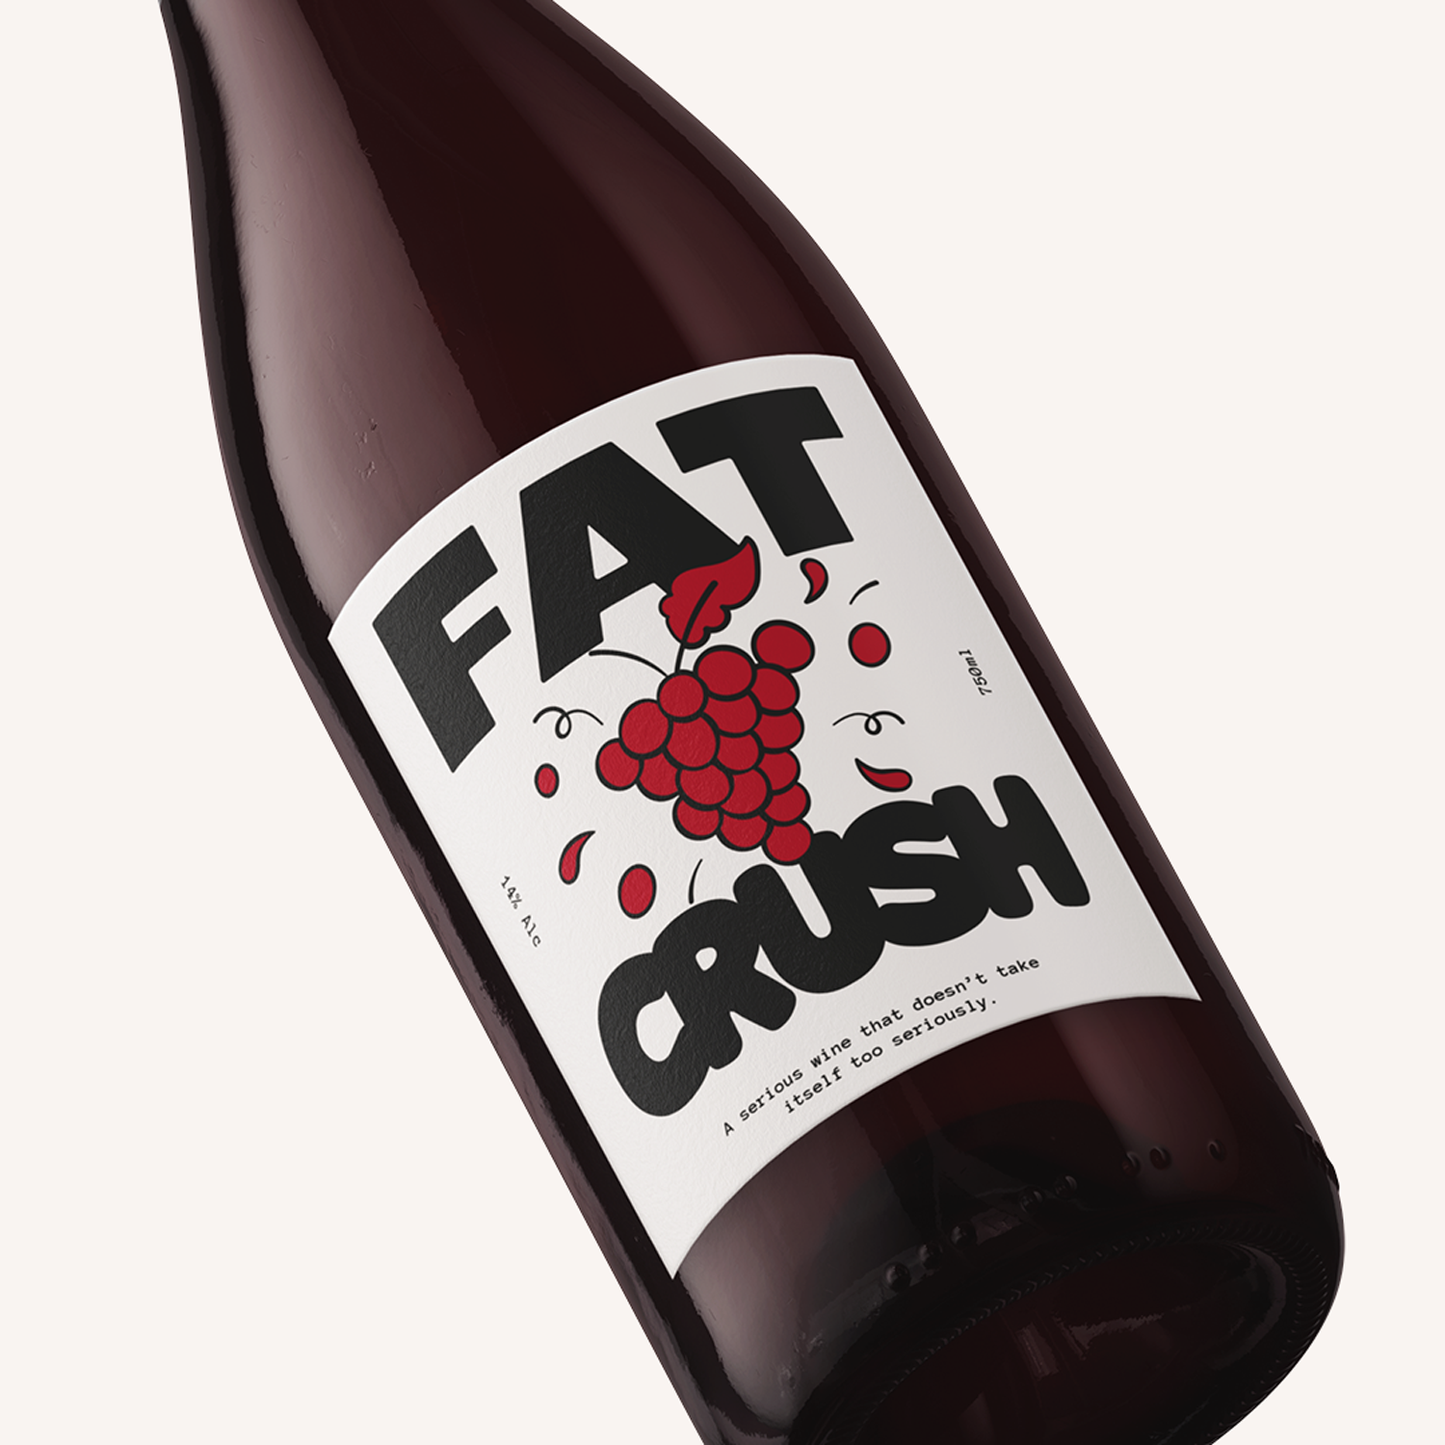 FAT CRUSH RED - Case of 6